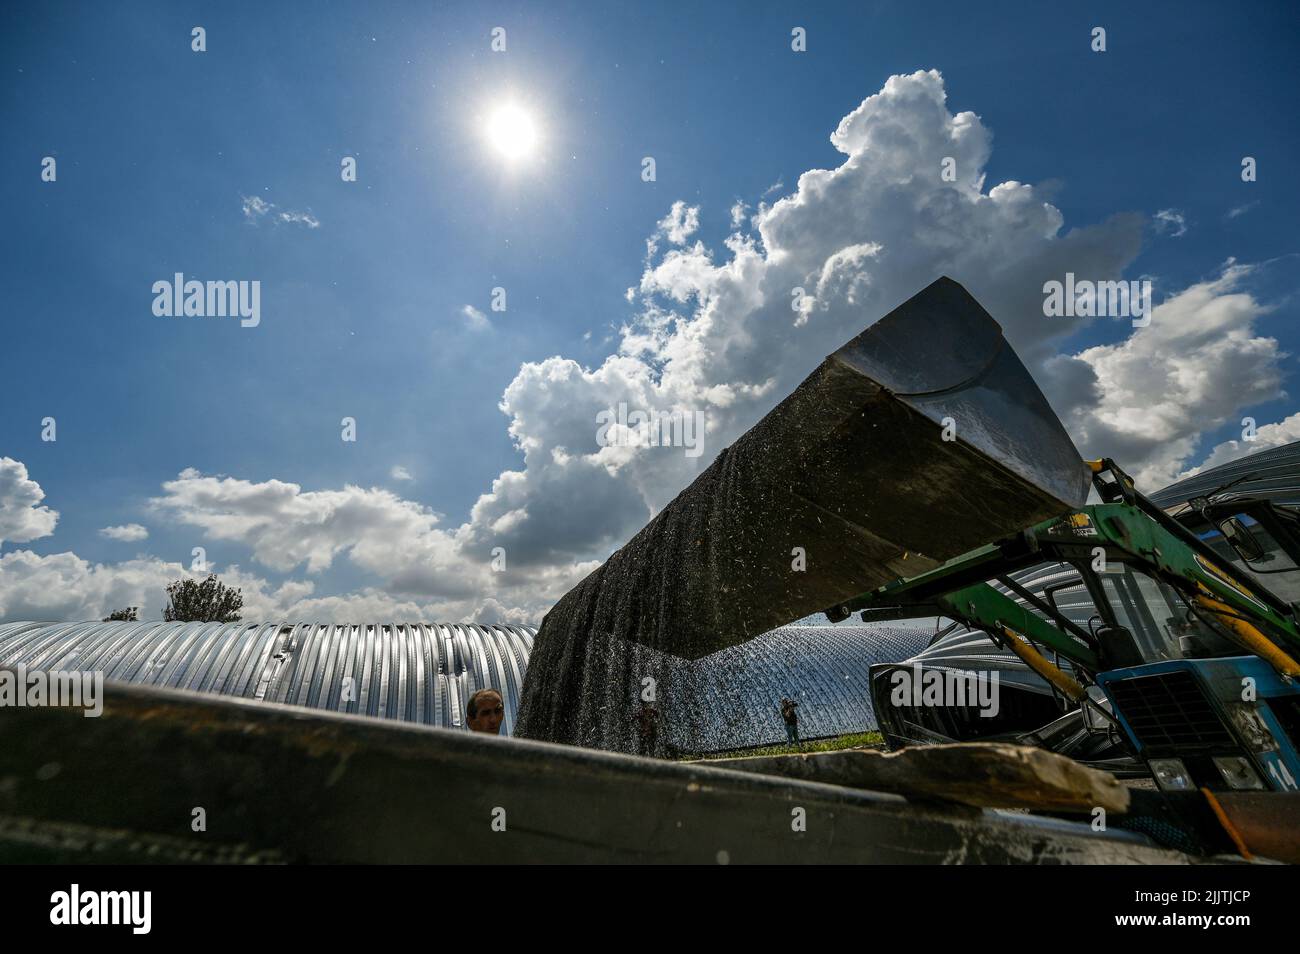 ZAPORIZHZHIA REGION, UKRAINE - JULY 27, 2022 - The premises of an agricultural enterprise show damage caused by the missile attack of the Russian troo Stock Photo